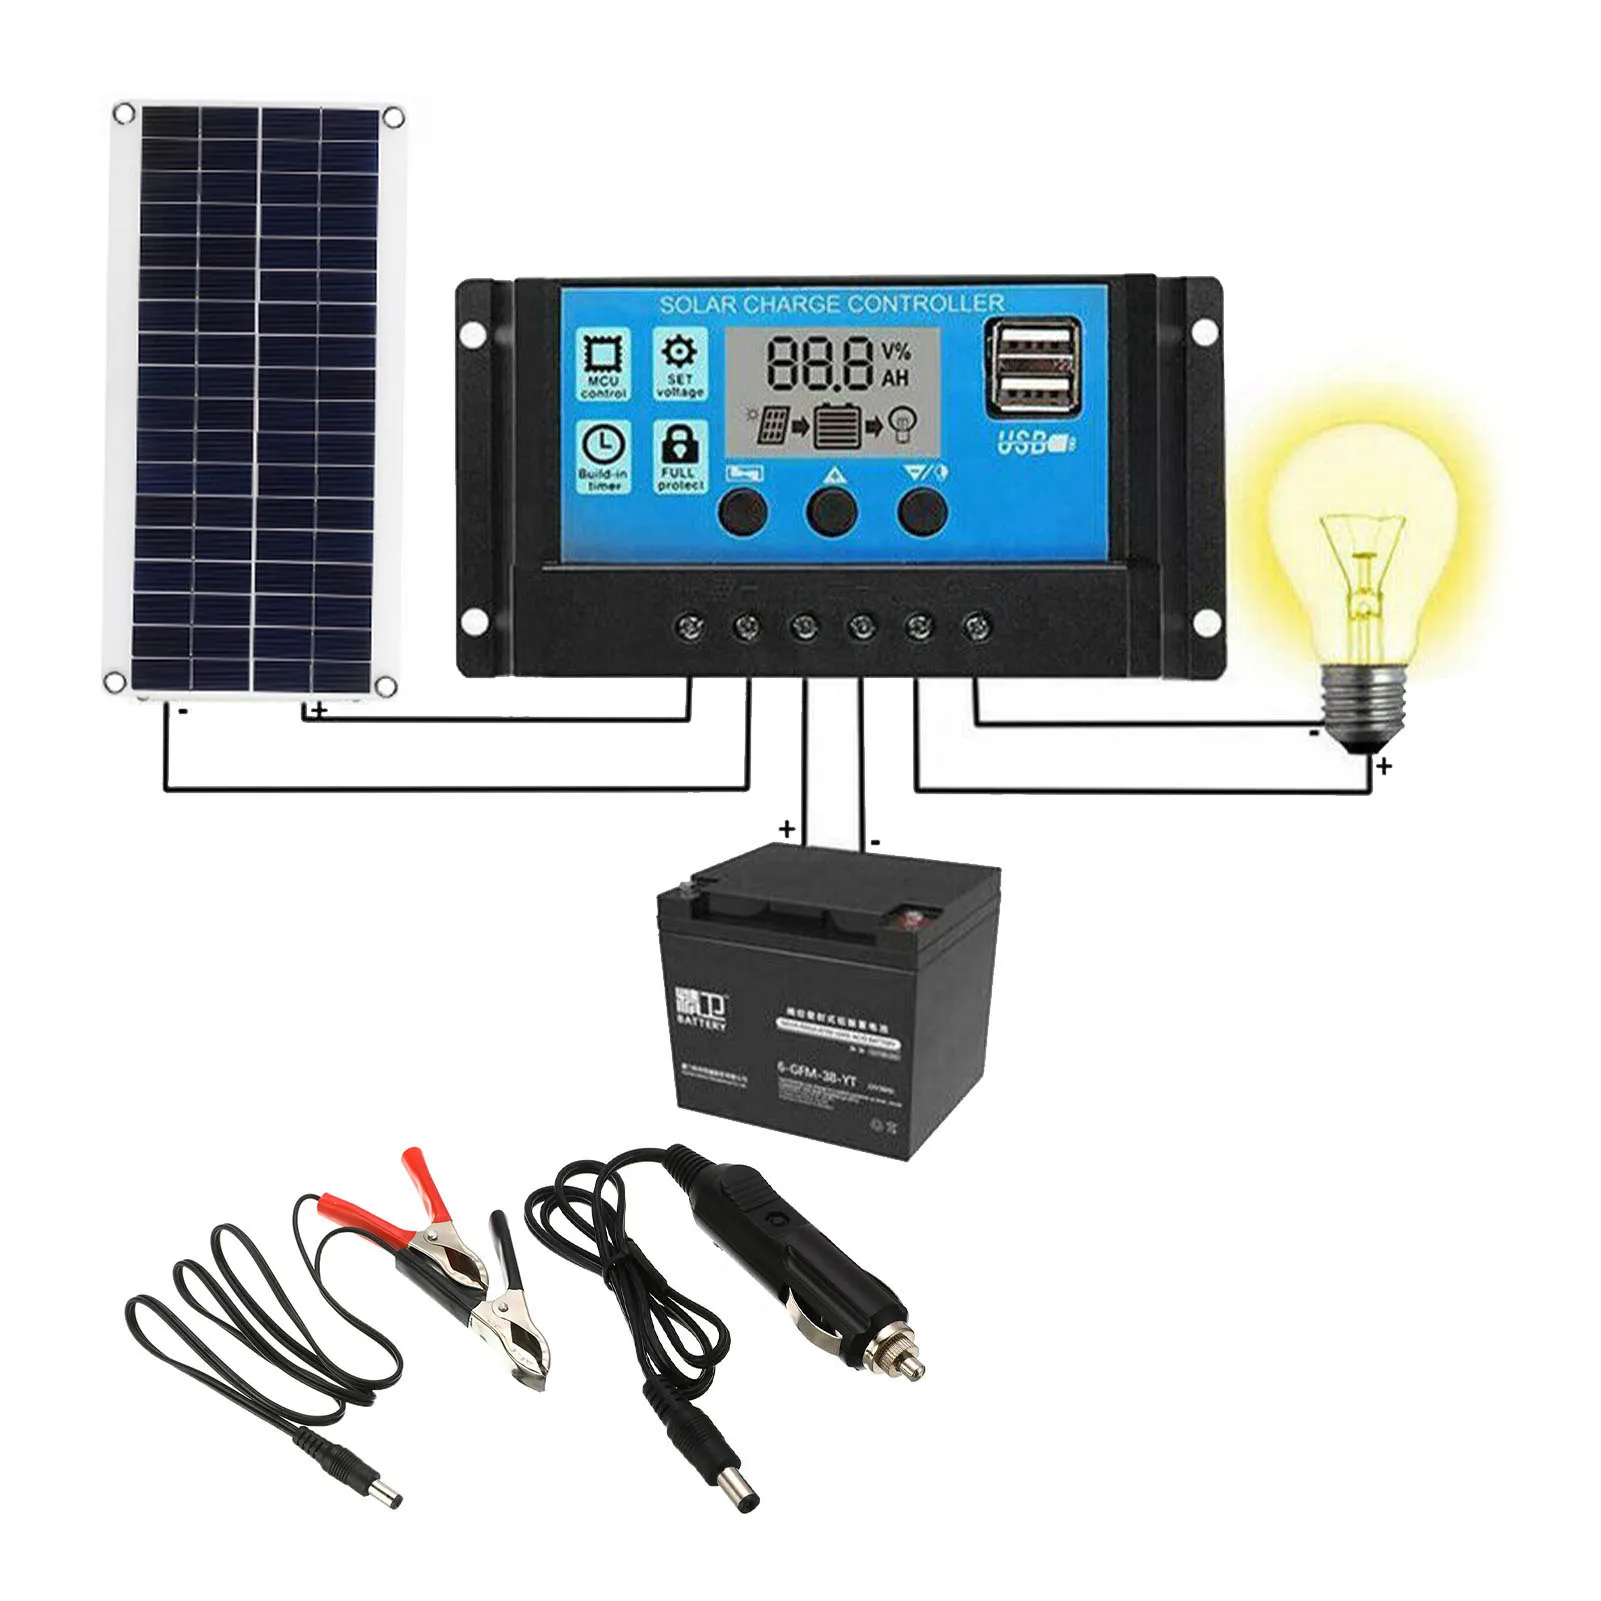 

12W Solar Charger 10A Controller Kit PanelPortable Solar Panel Outdoor Solar System For Cell Mobile Phone Chargers